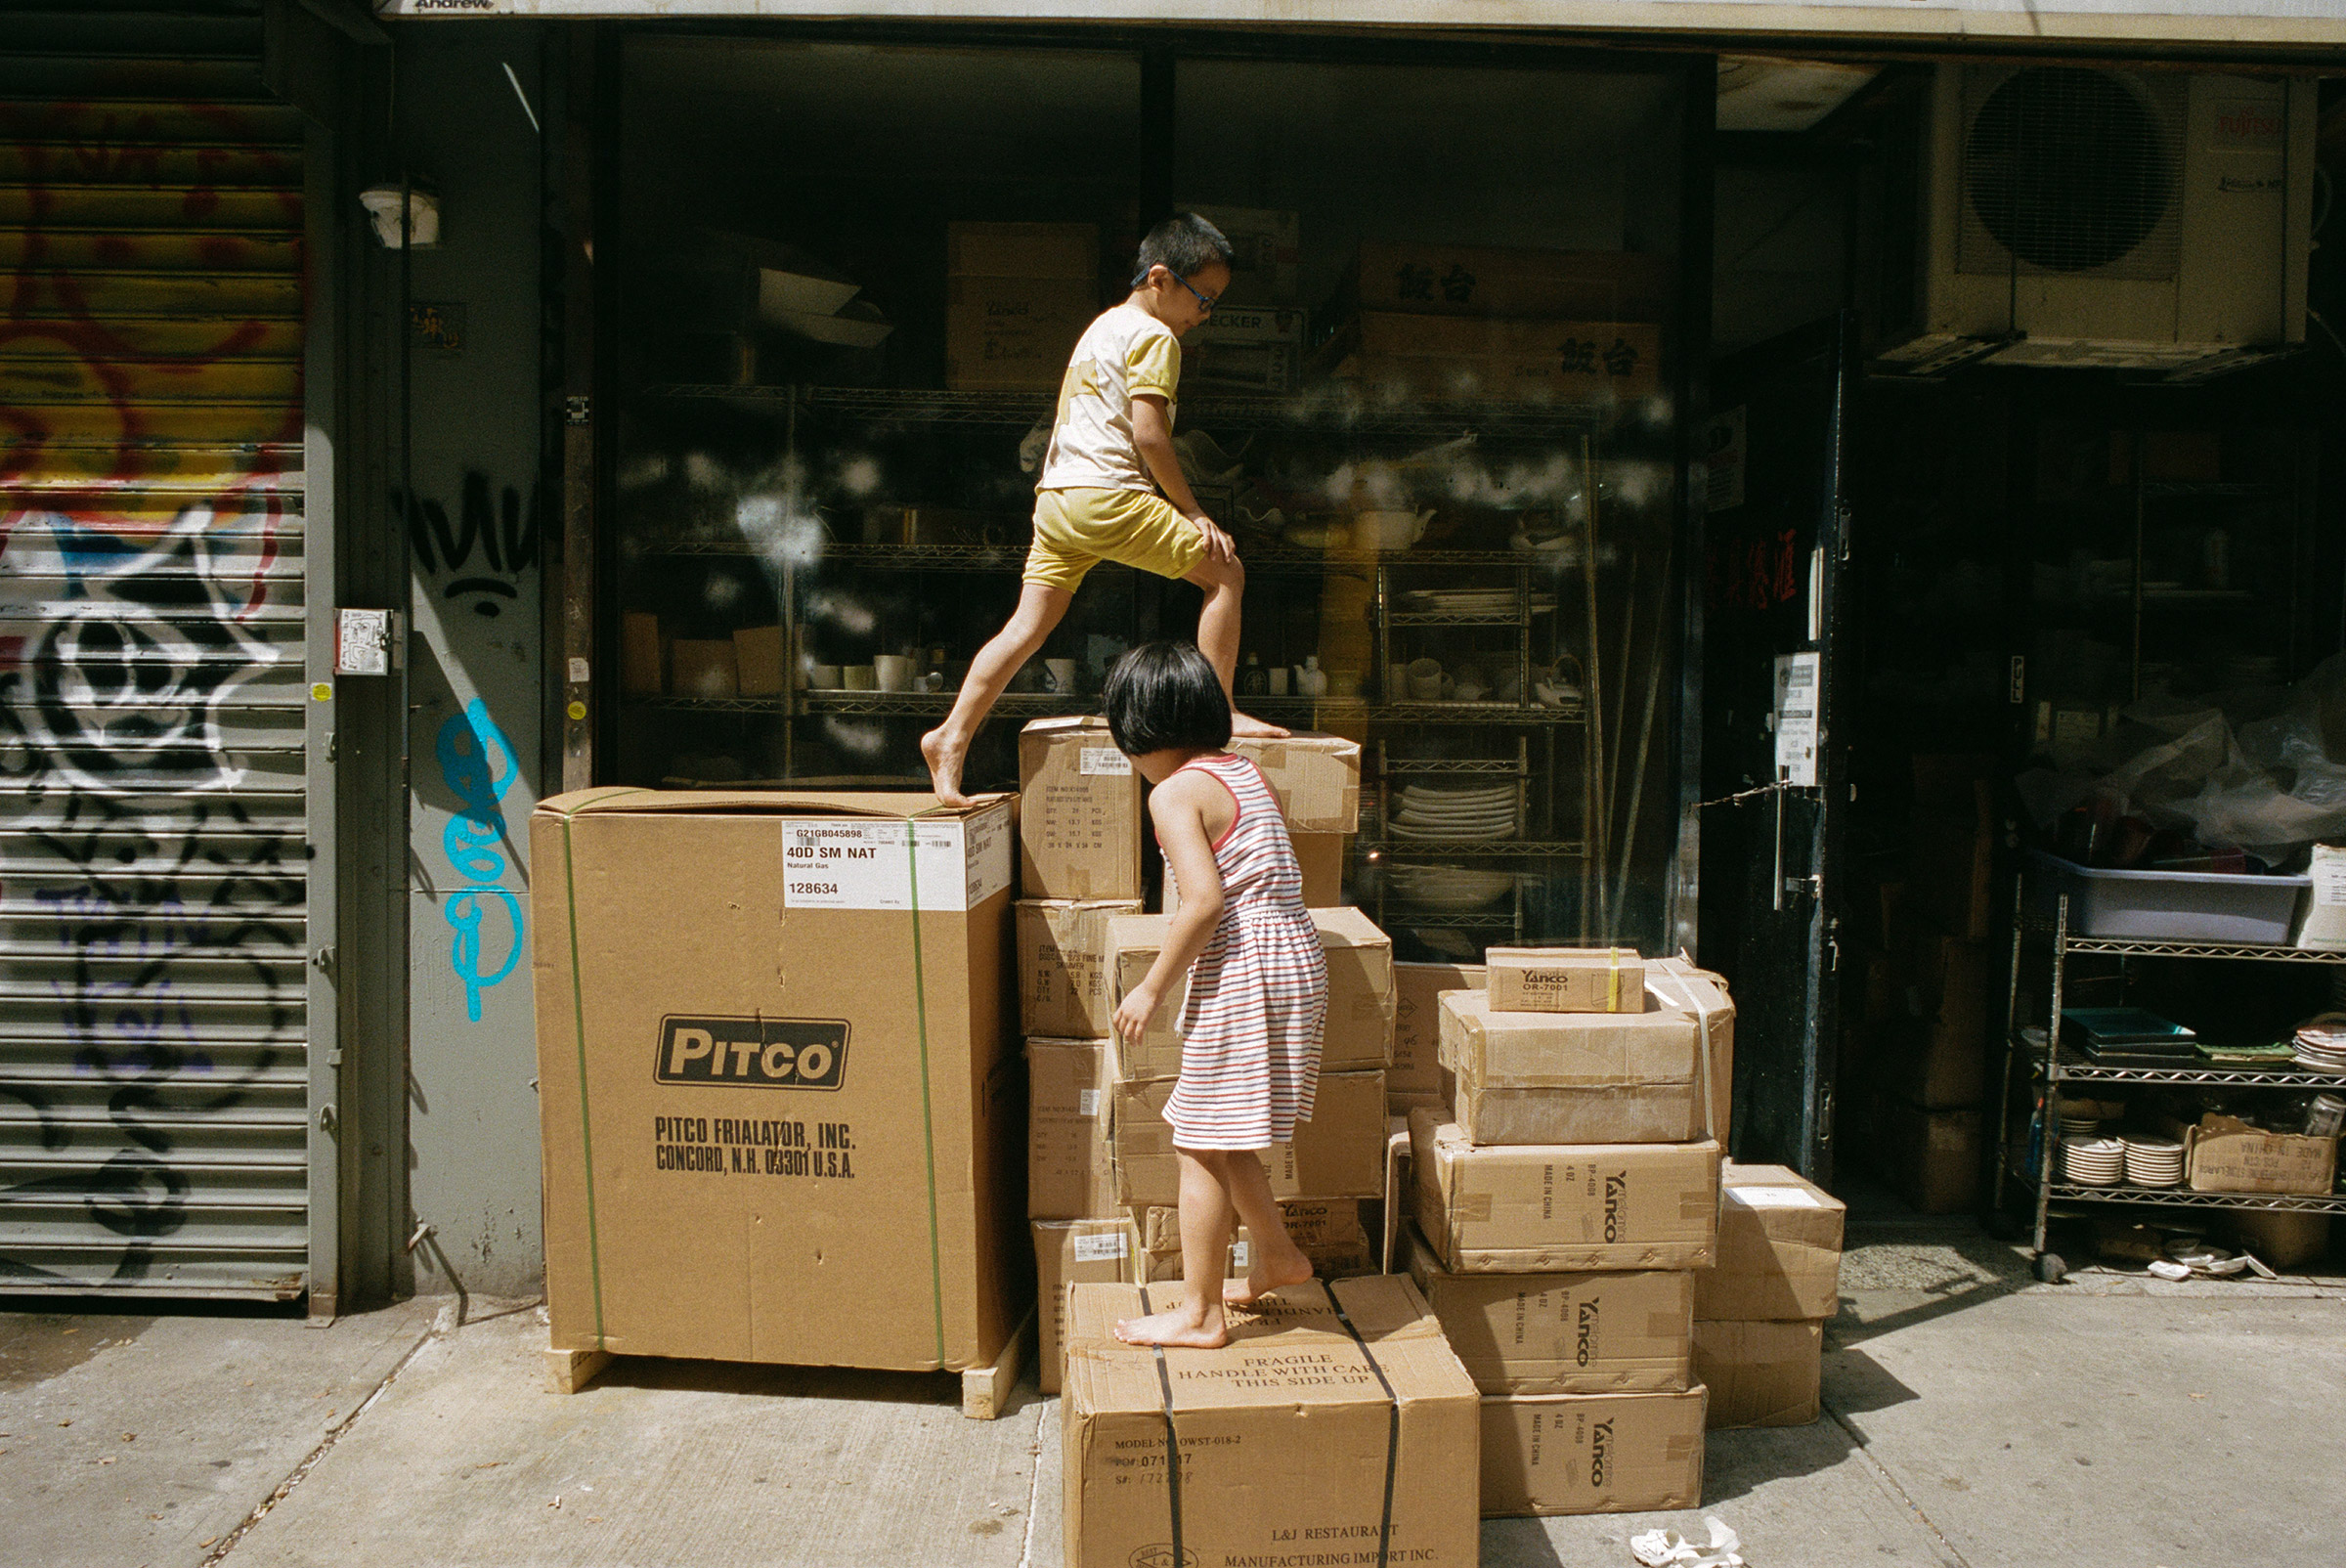 Kids climb on stacks of boxed kitchenware at the corner of Ludlow and Hester Streets, Sept. 1, 2021. (Daniel Arnold for TIME)